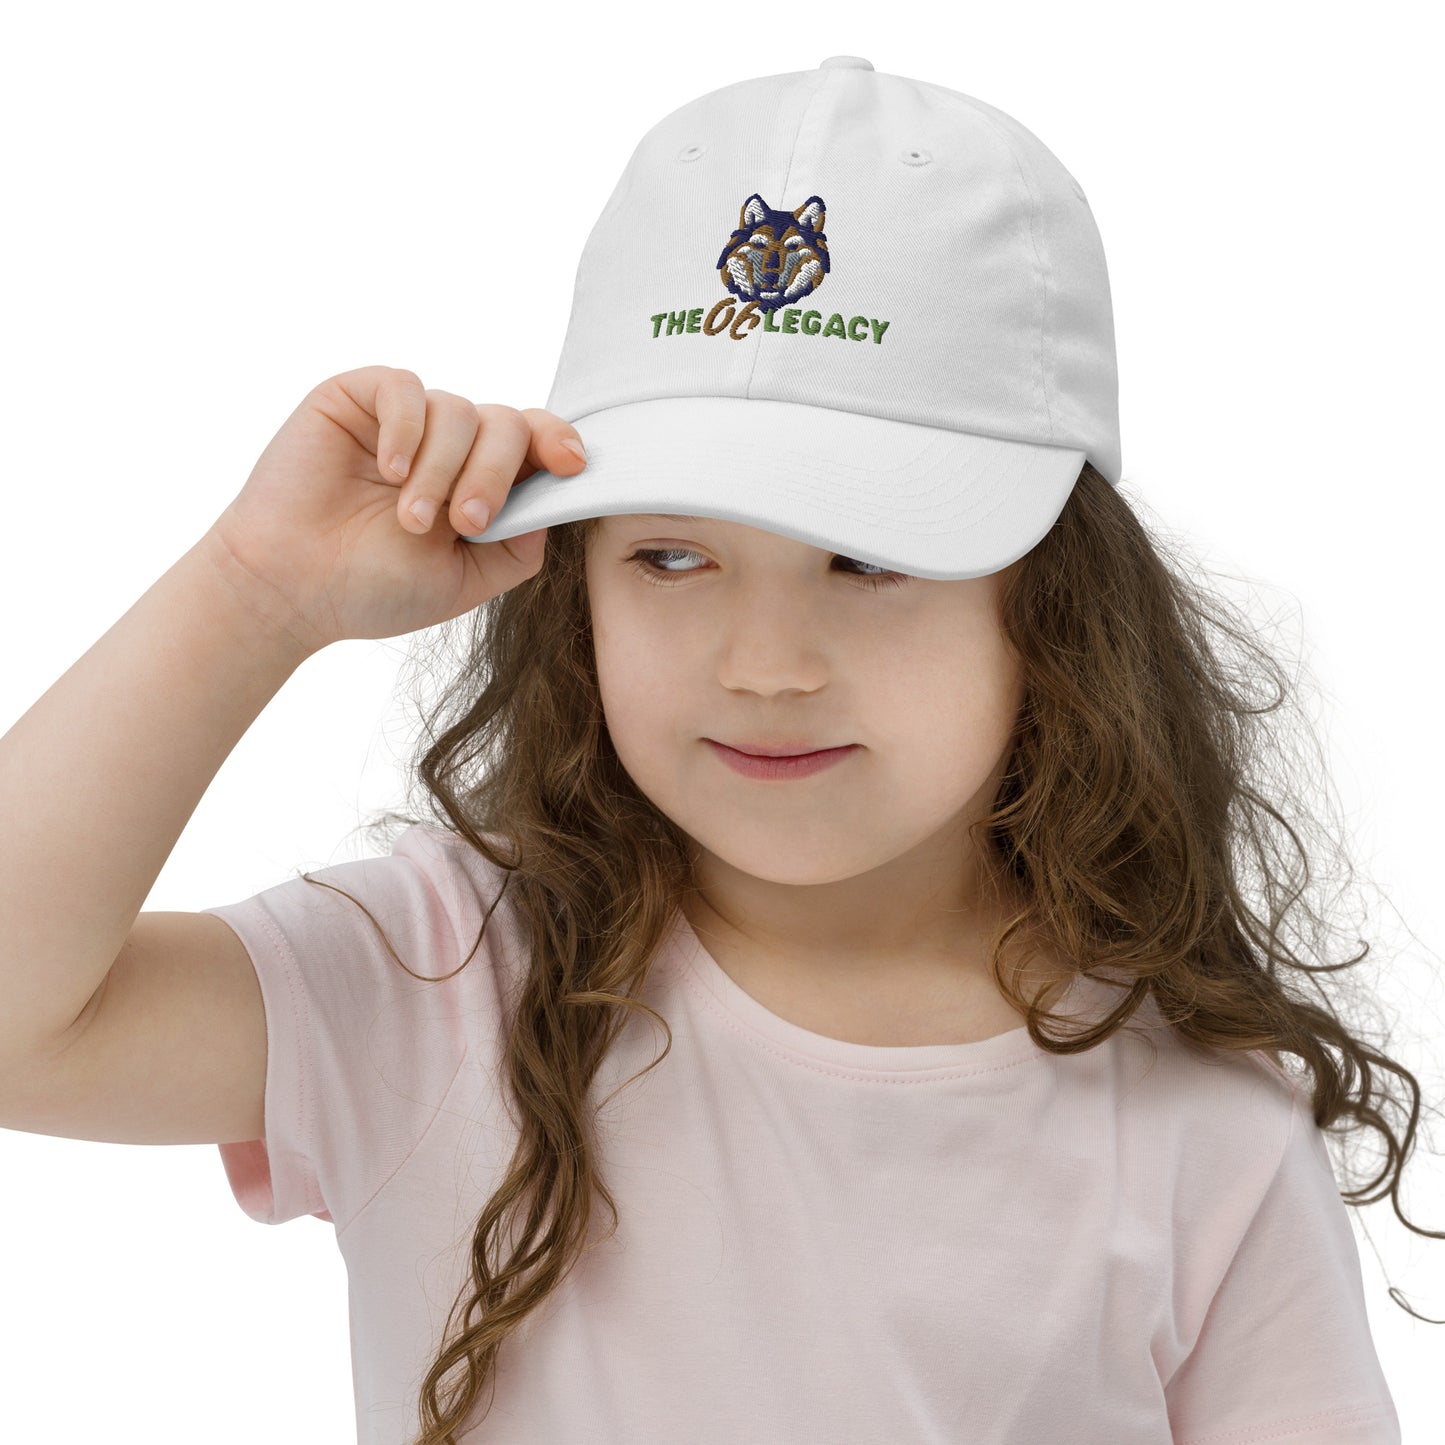 Embroidered youth baseball cap